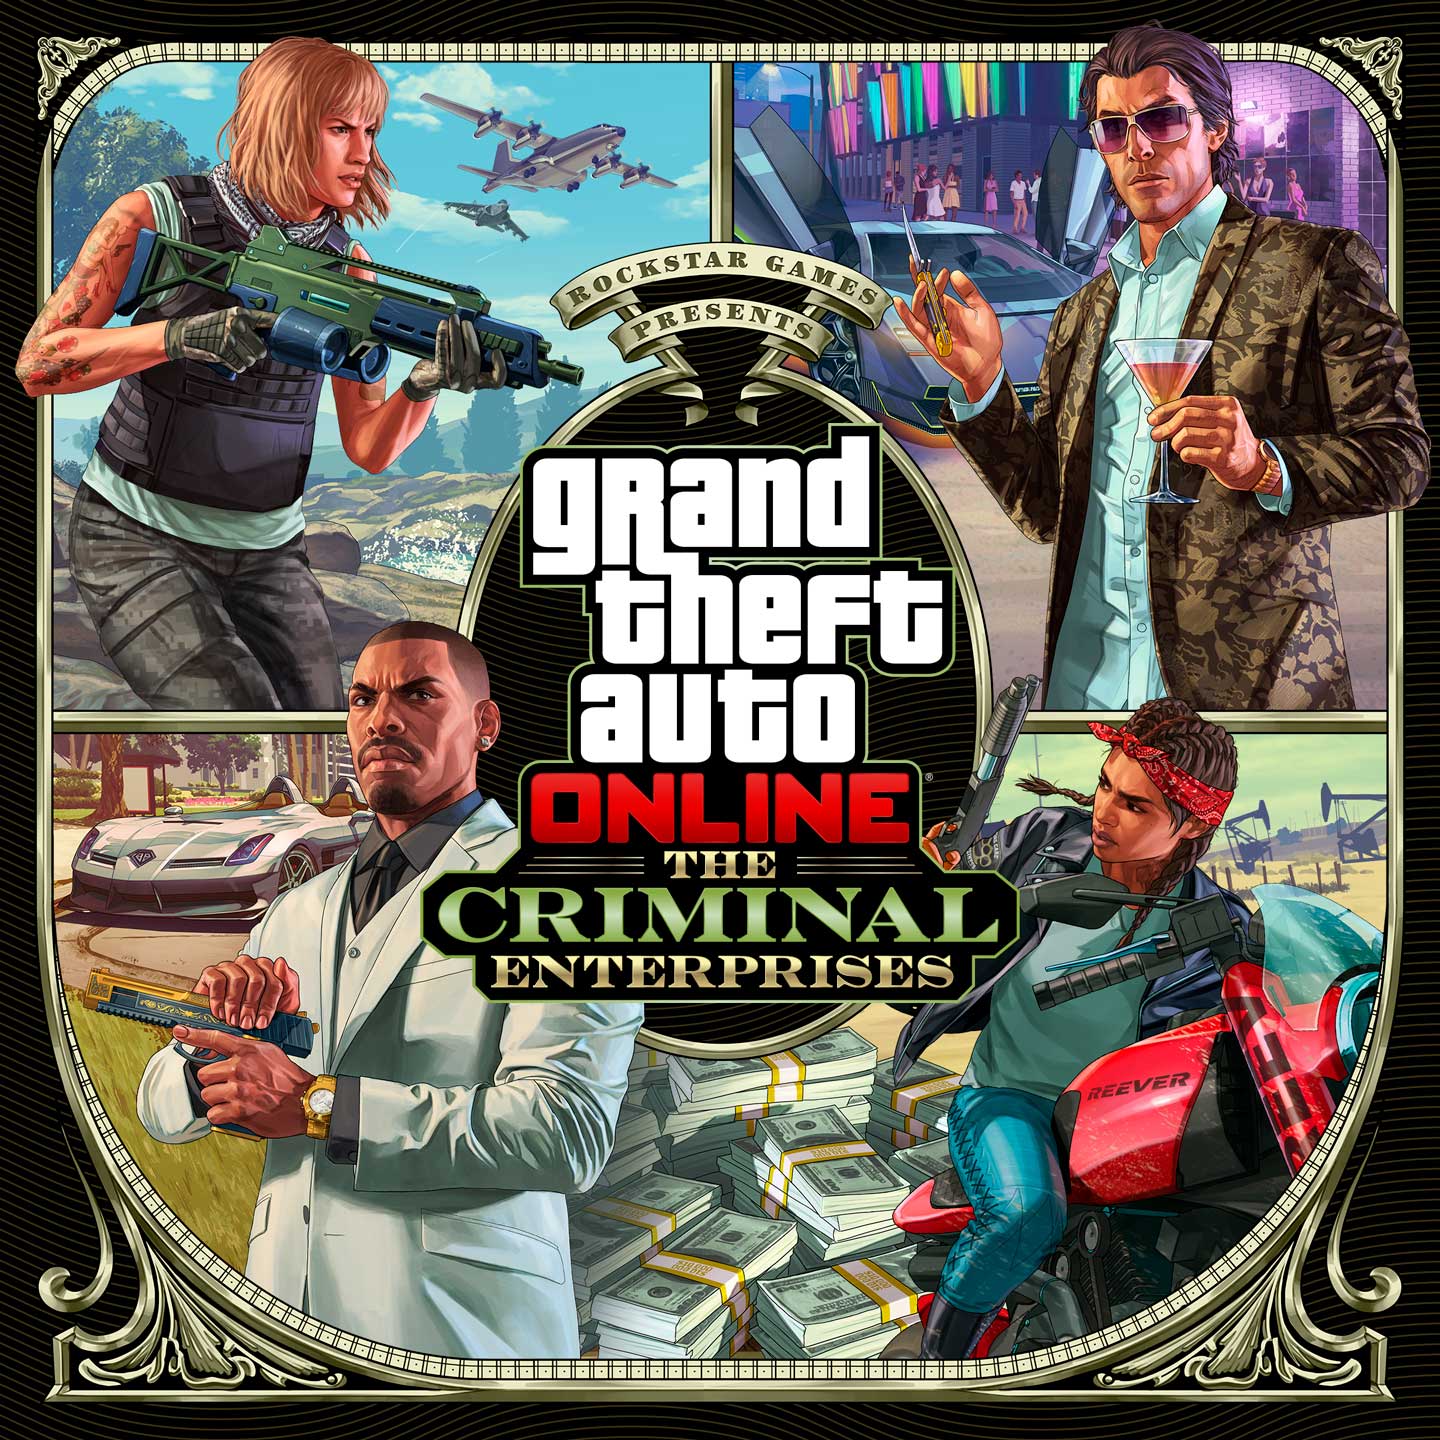 Image of the new DLC for GTA Online.